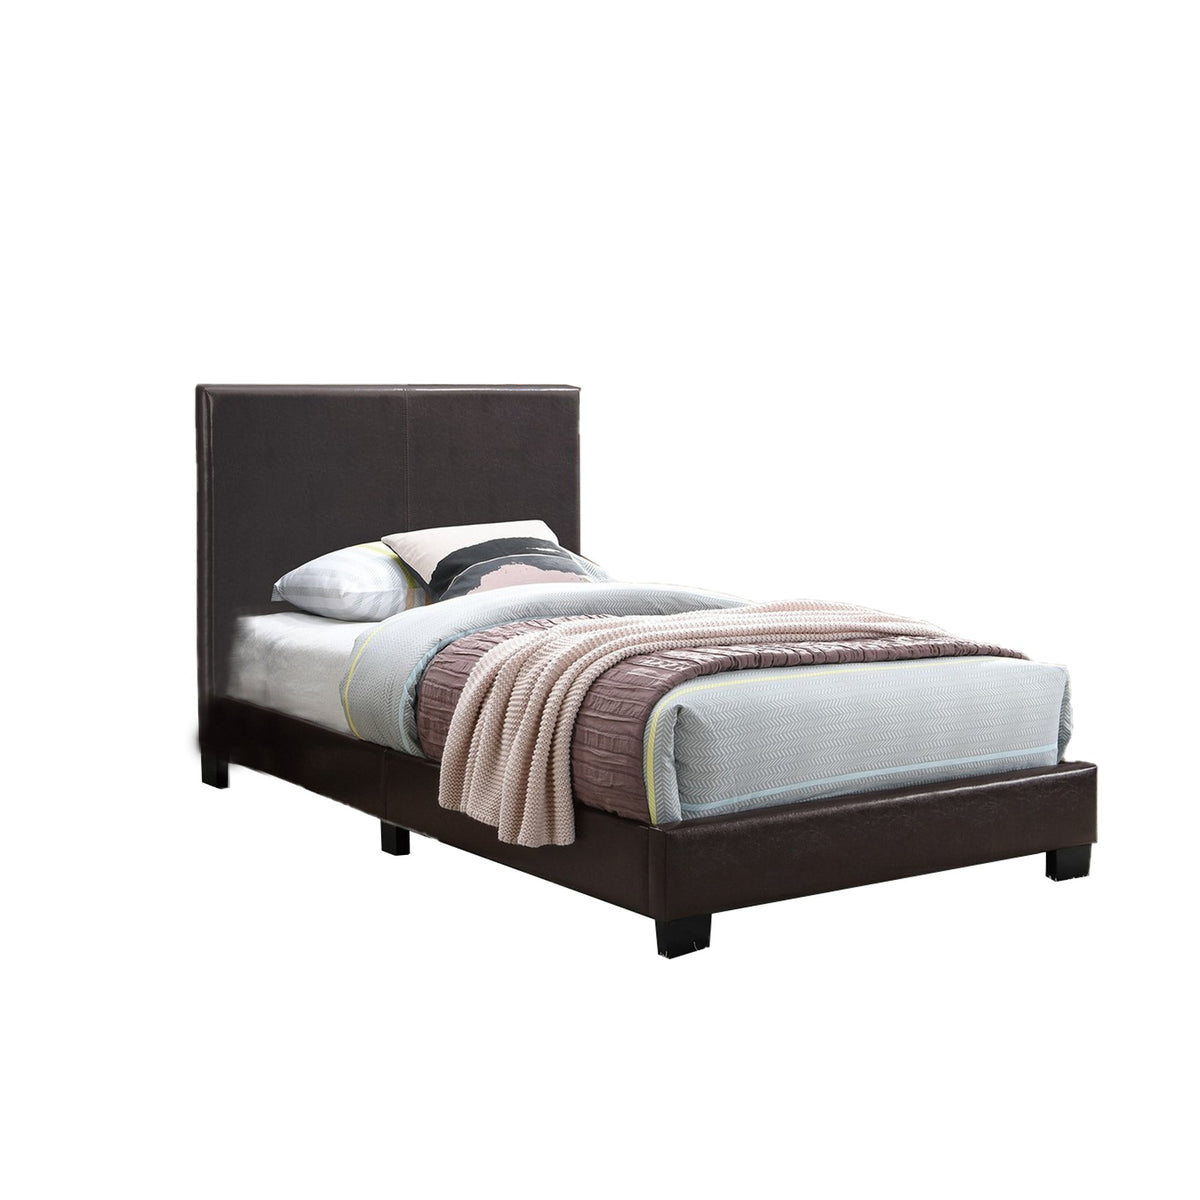 Transitional Style Leatherette Queen Bed with Padded Headboard, Dark Brown - BM232044